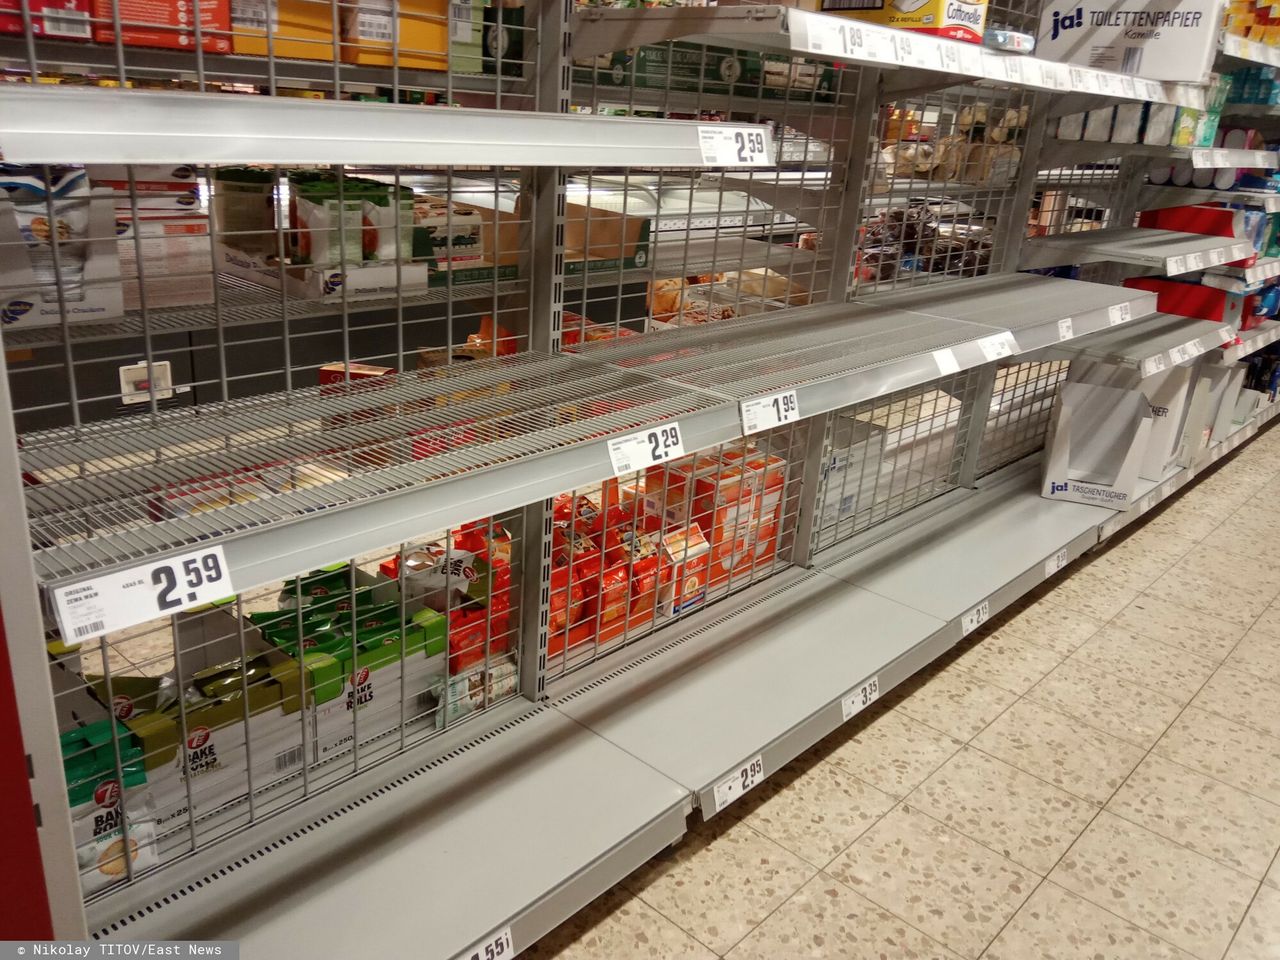 Germany sounds the alarm: "Catastrophic situation" in stores